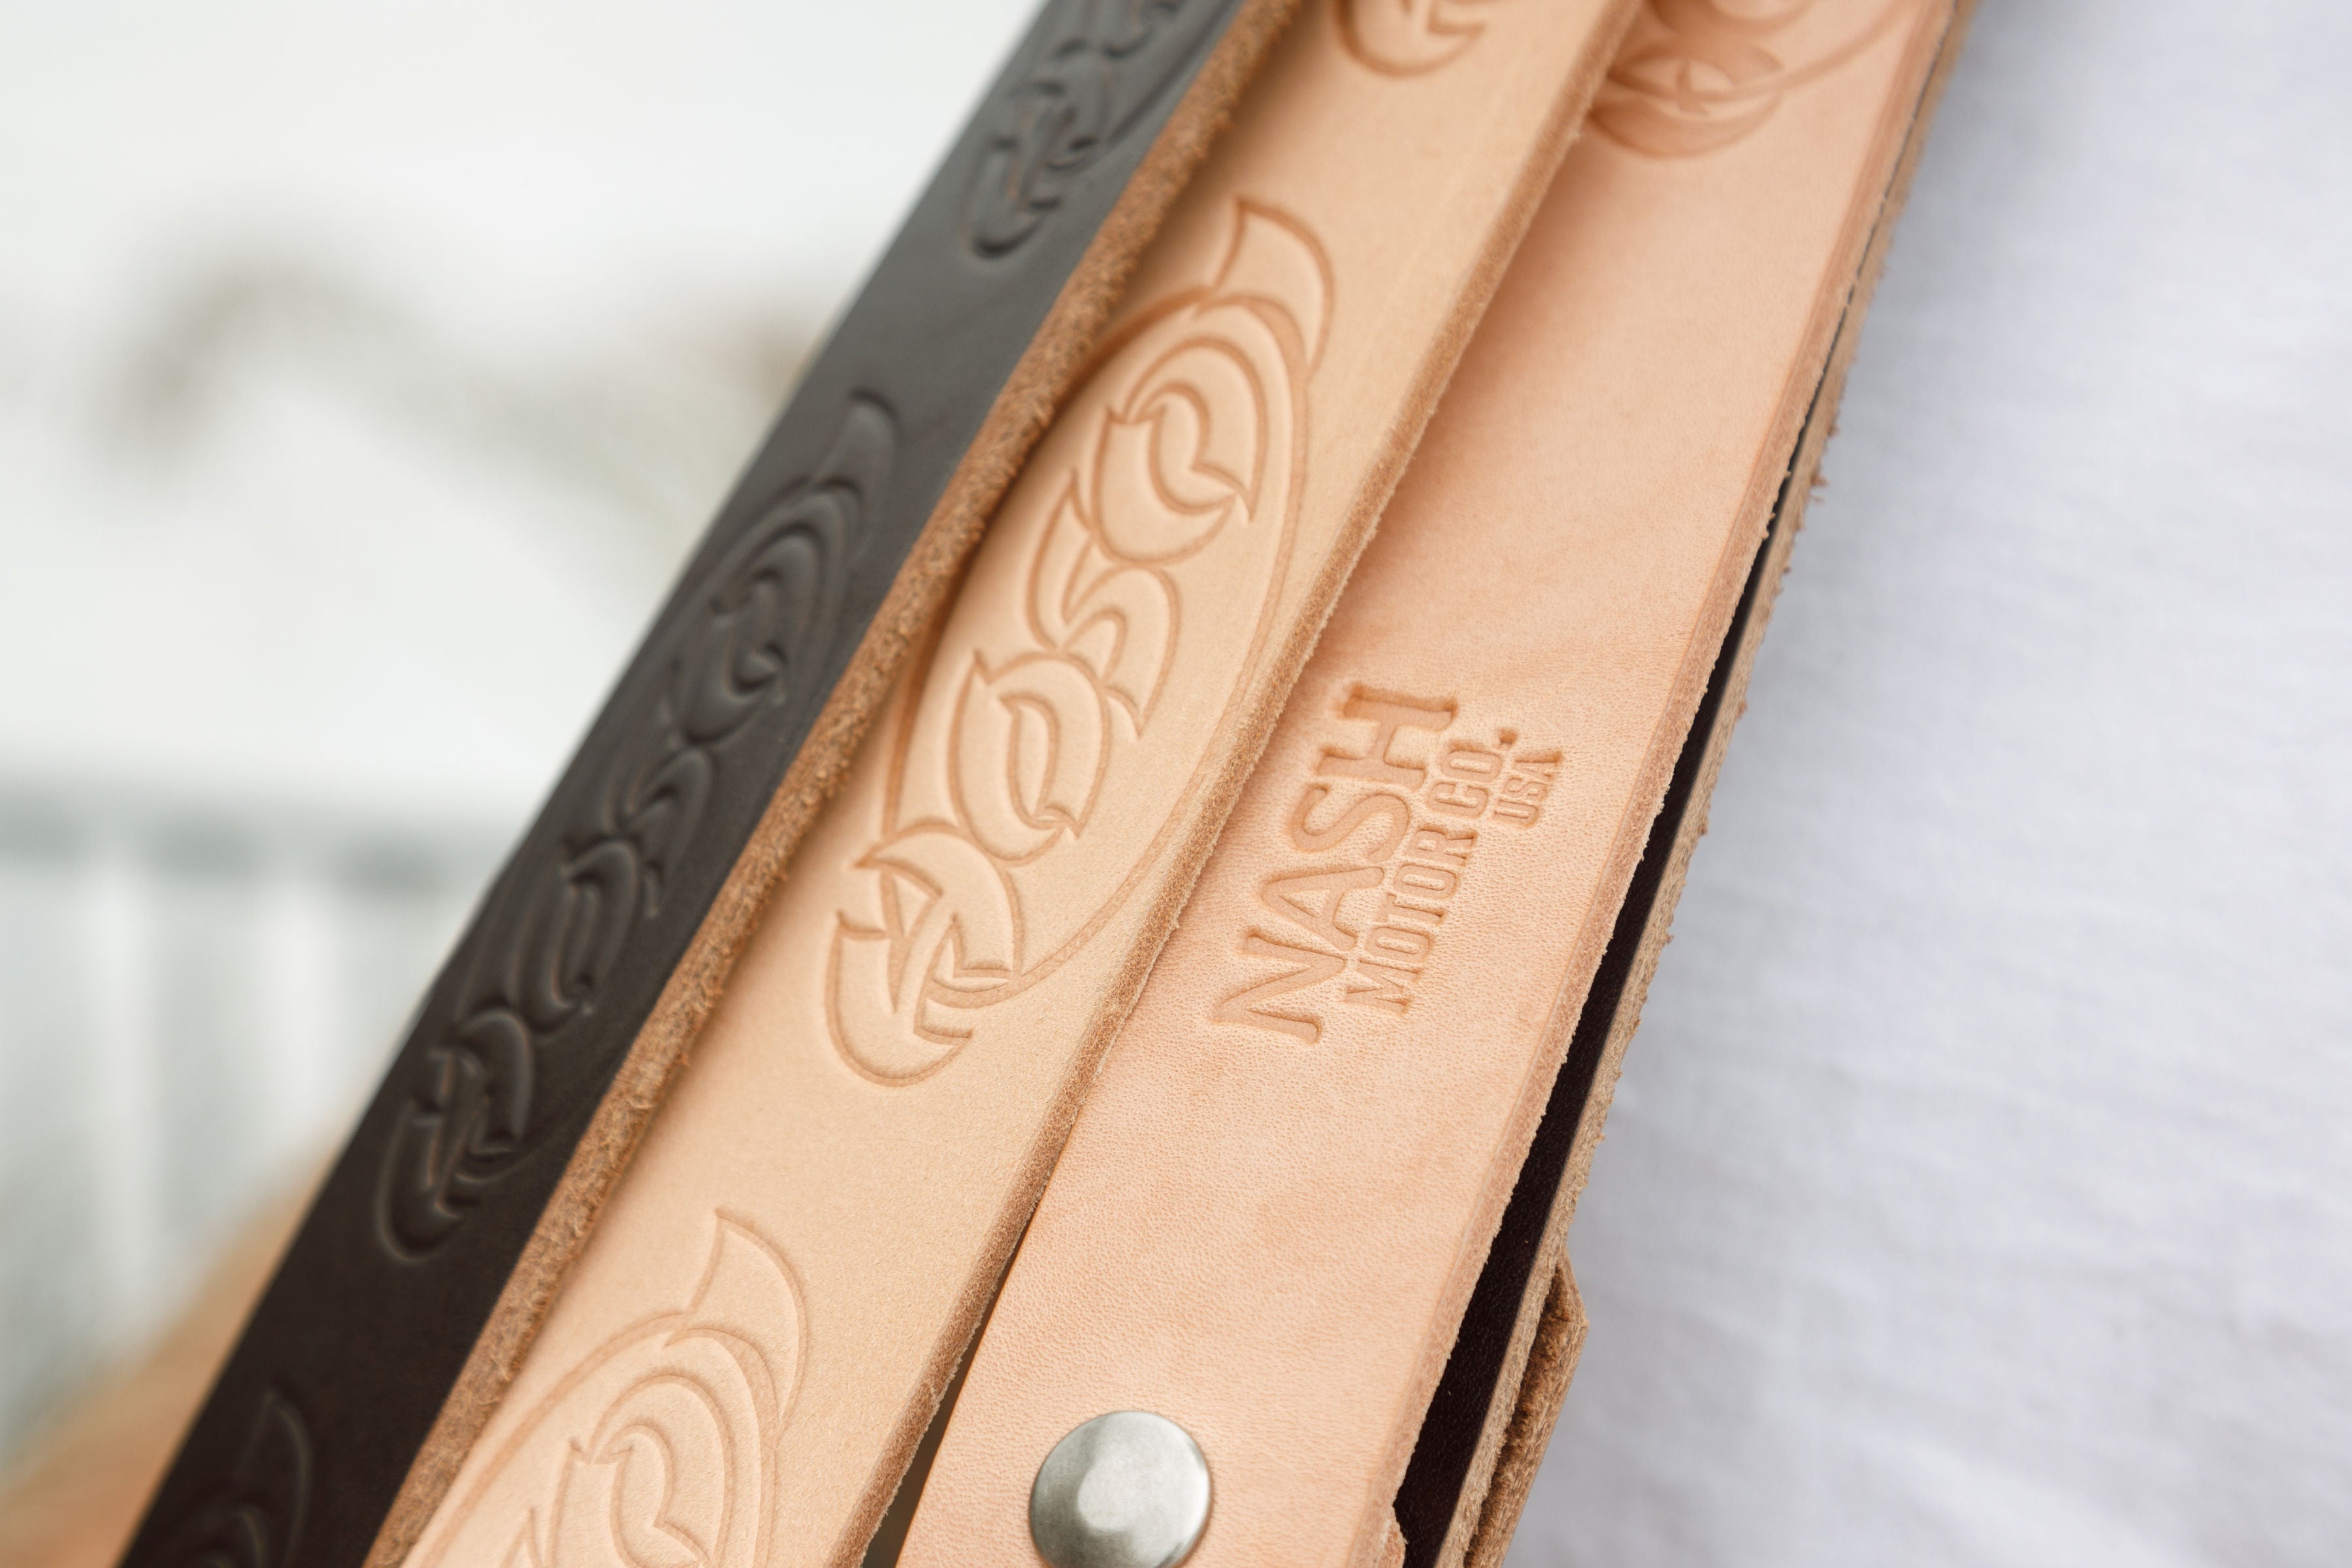 The Christian Hosoi Signature Leather Belt by Nash Motorcycle Co. SM / Black / Old Brass Hardware